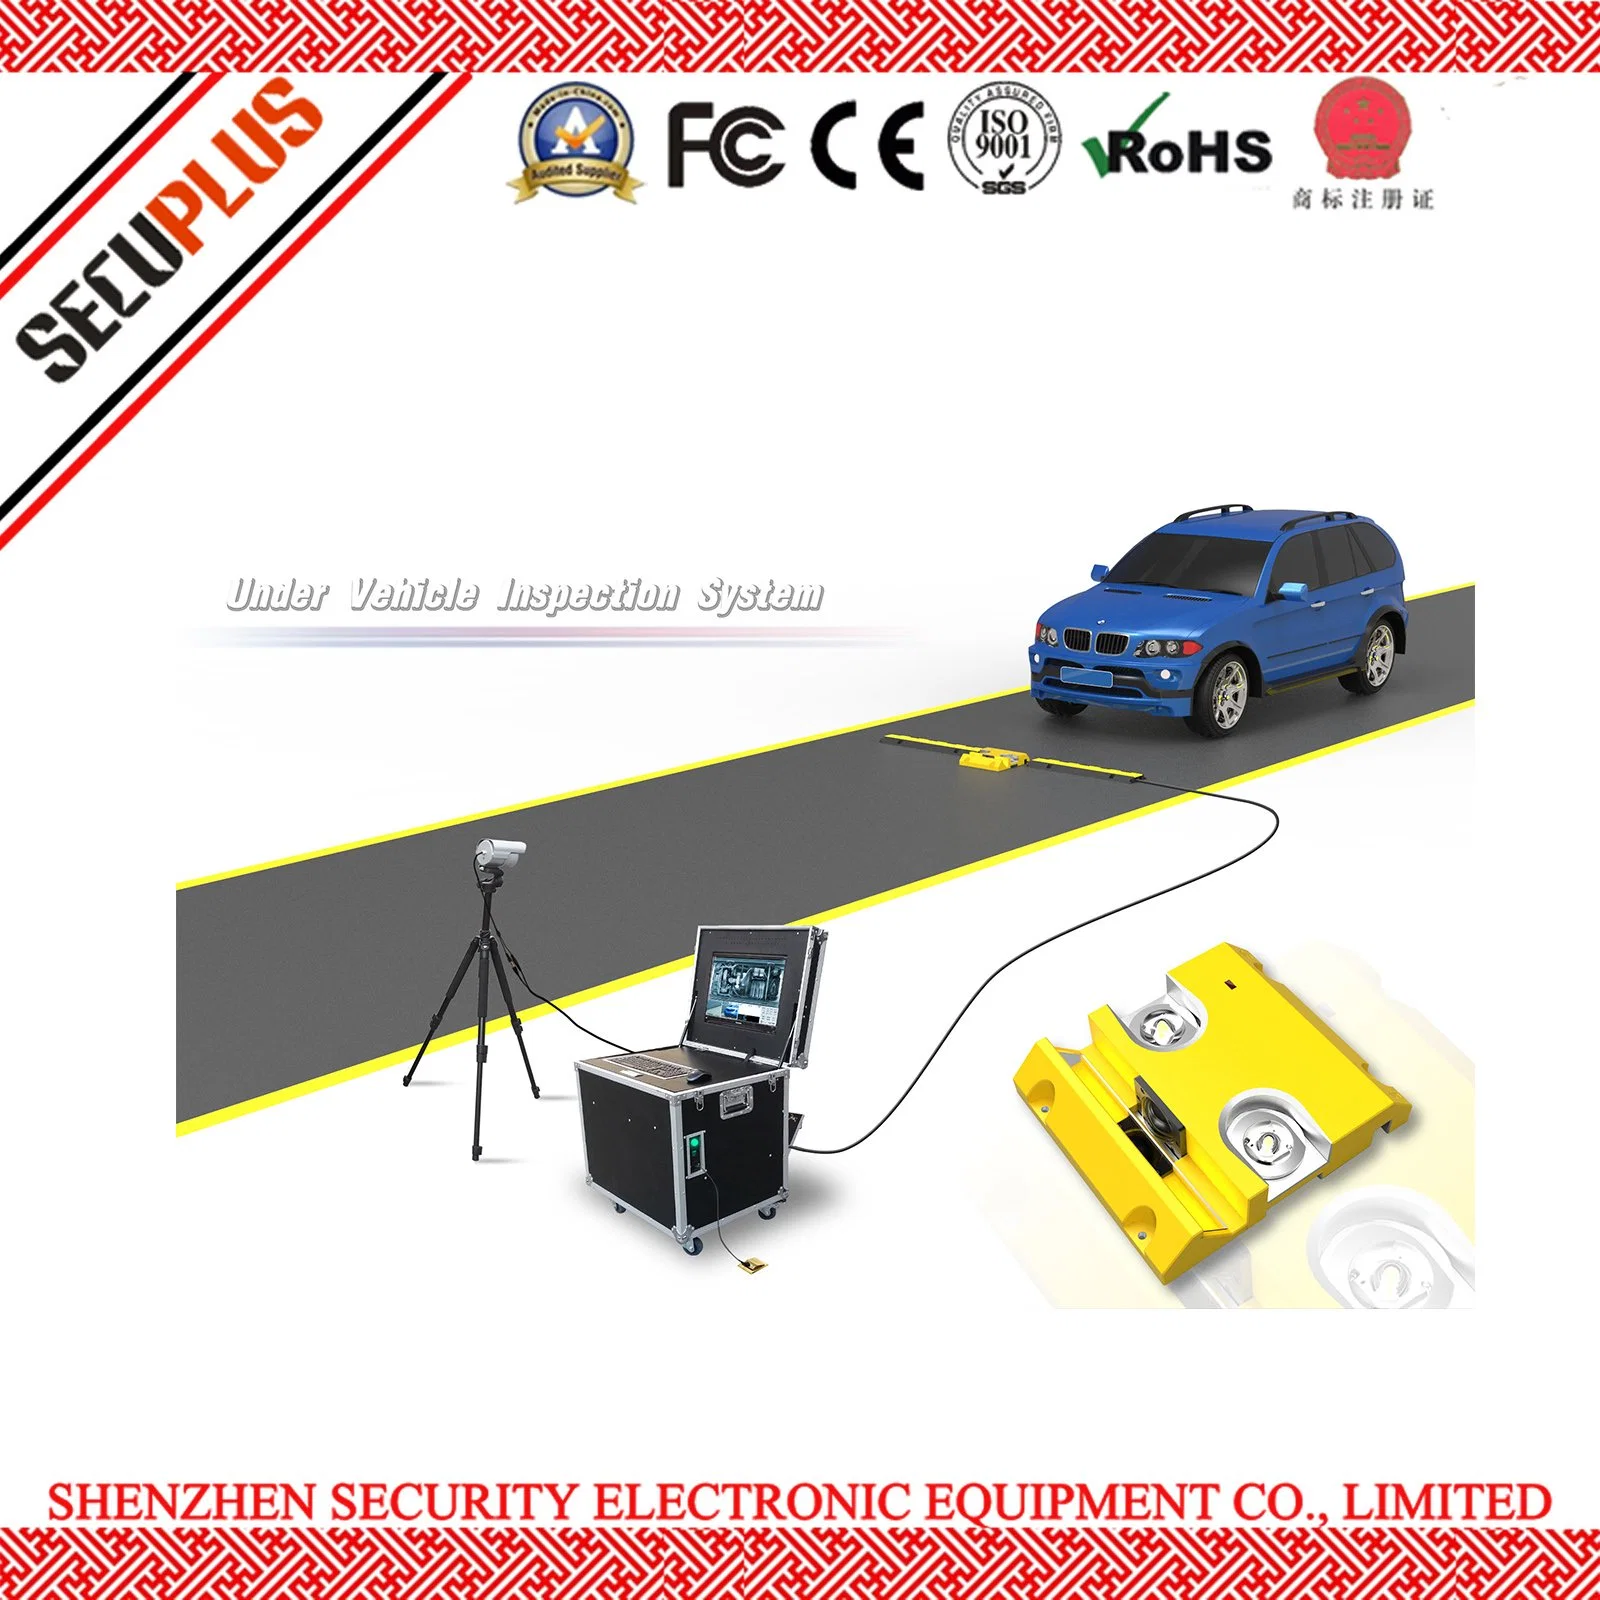 UVSS Under Vehicle Surveillance Scanning Searching System for Border Control, Park Security SA3300